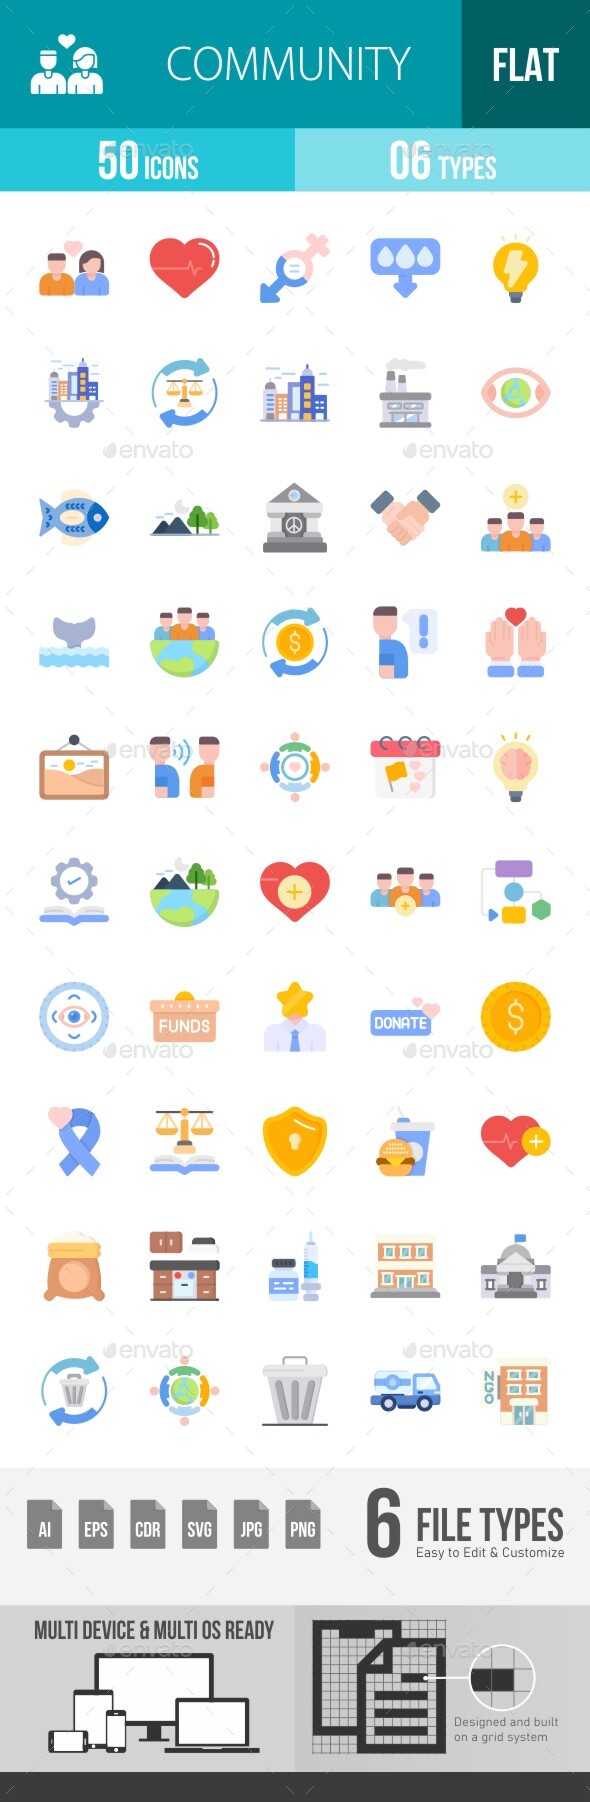 [DOWNLOAD]Community Flat Multicolor Icons